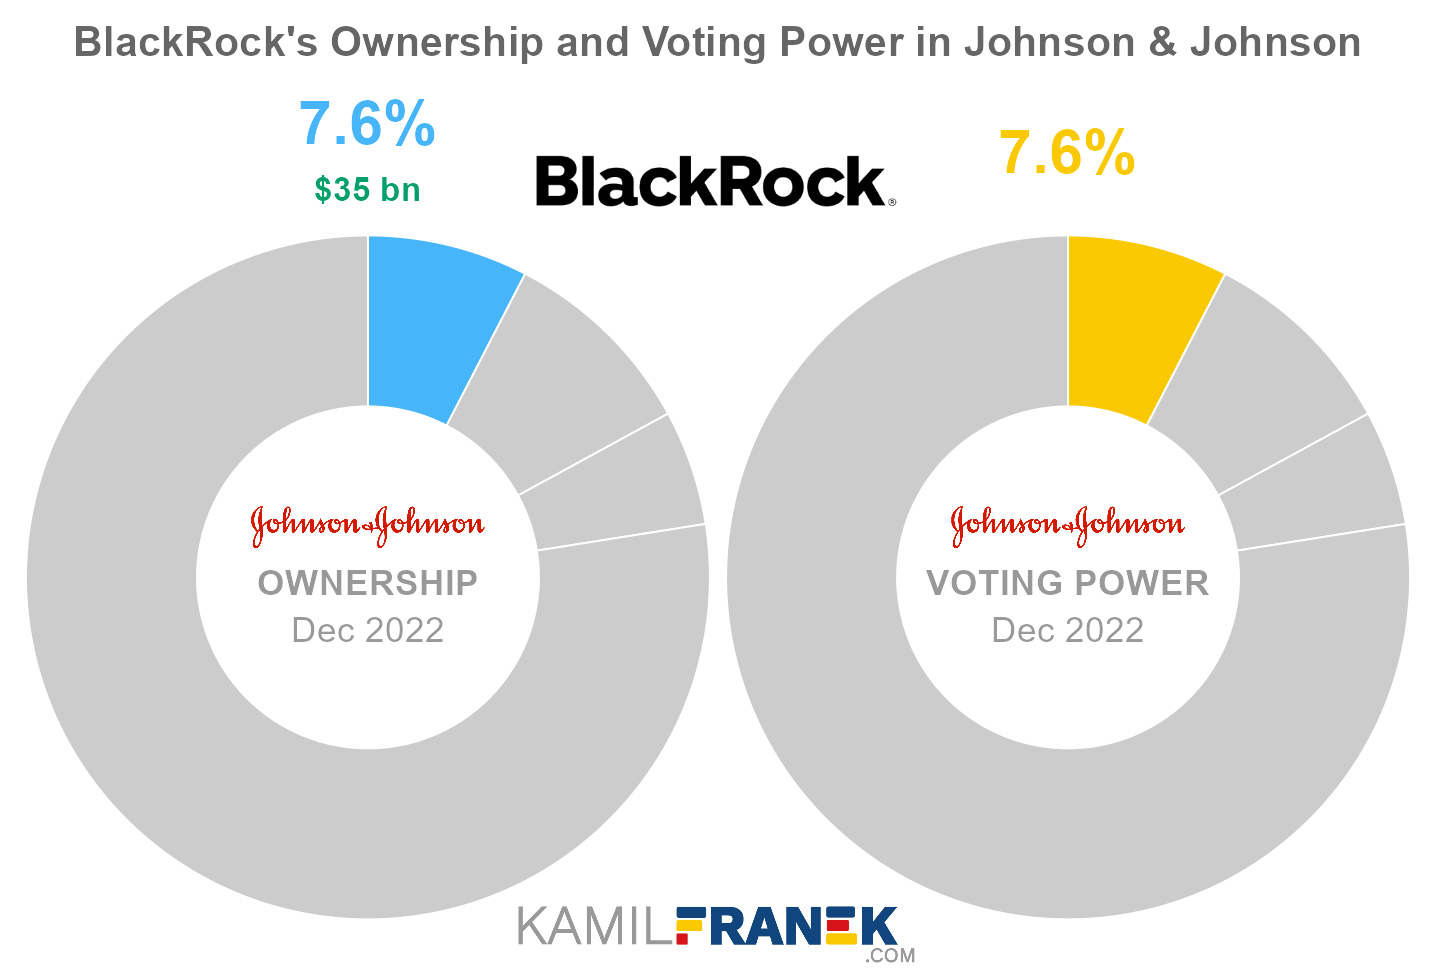 BlackRock's share ownership and voting power in Johnson & Johnson (chart)